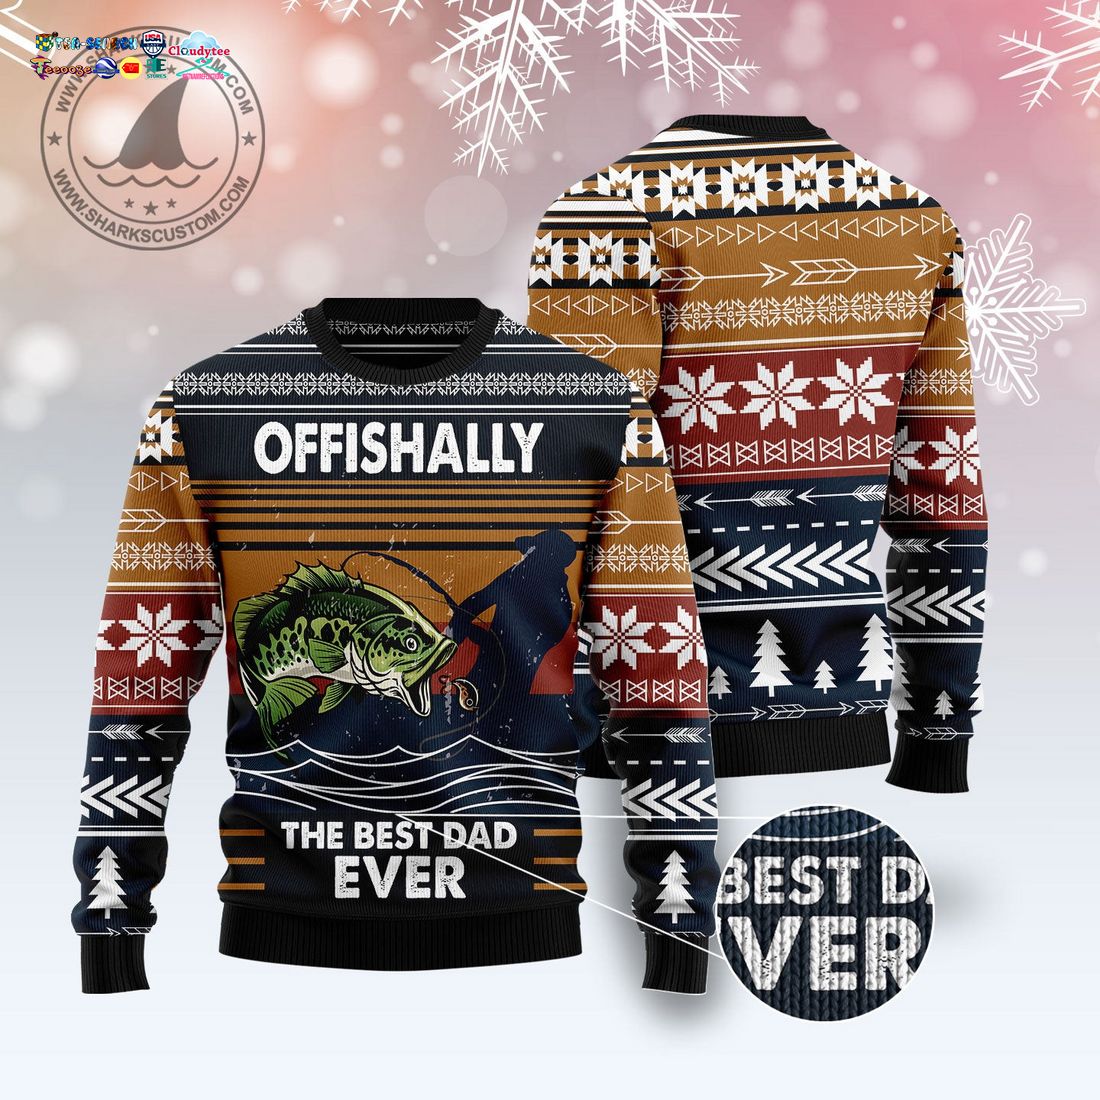 Offishally The Best Dad Ever Ugly Christmas Sweater - Such a charming picture.